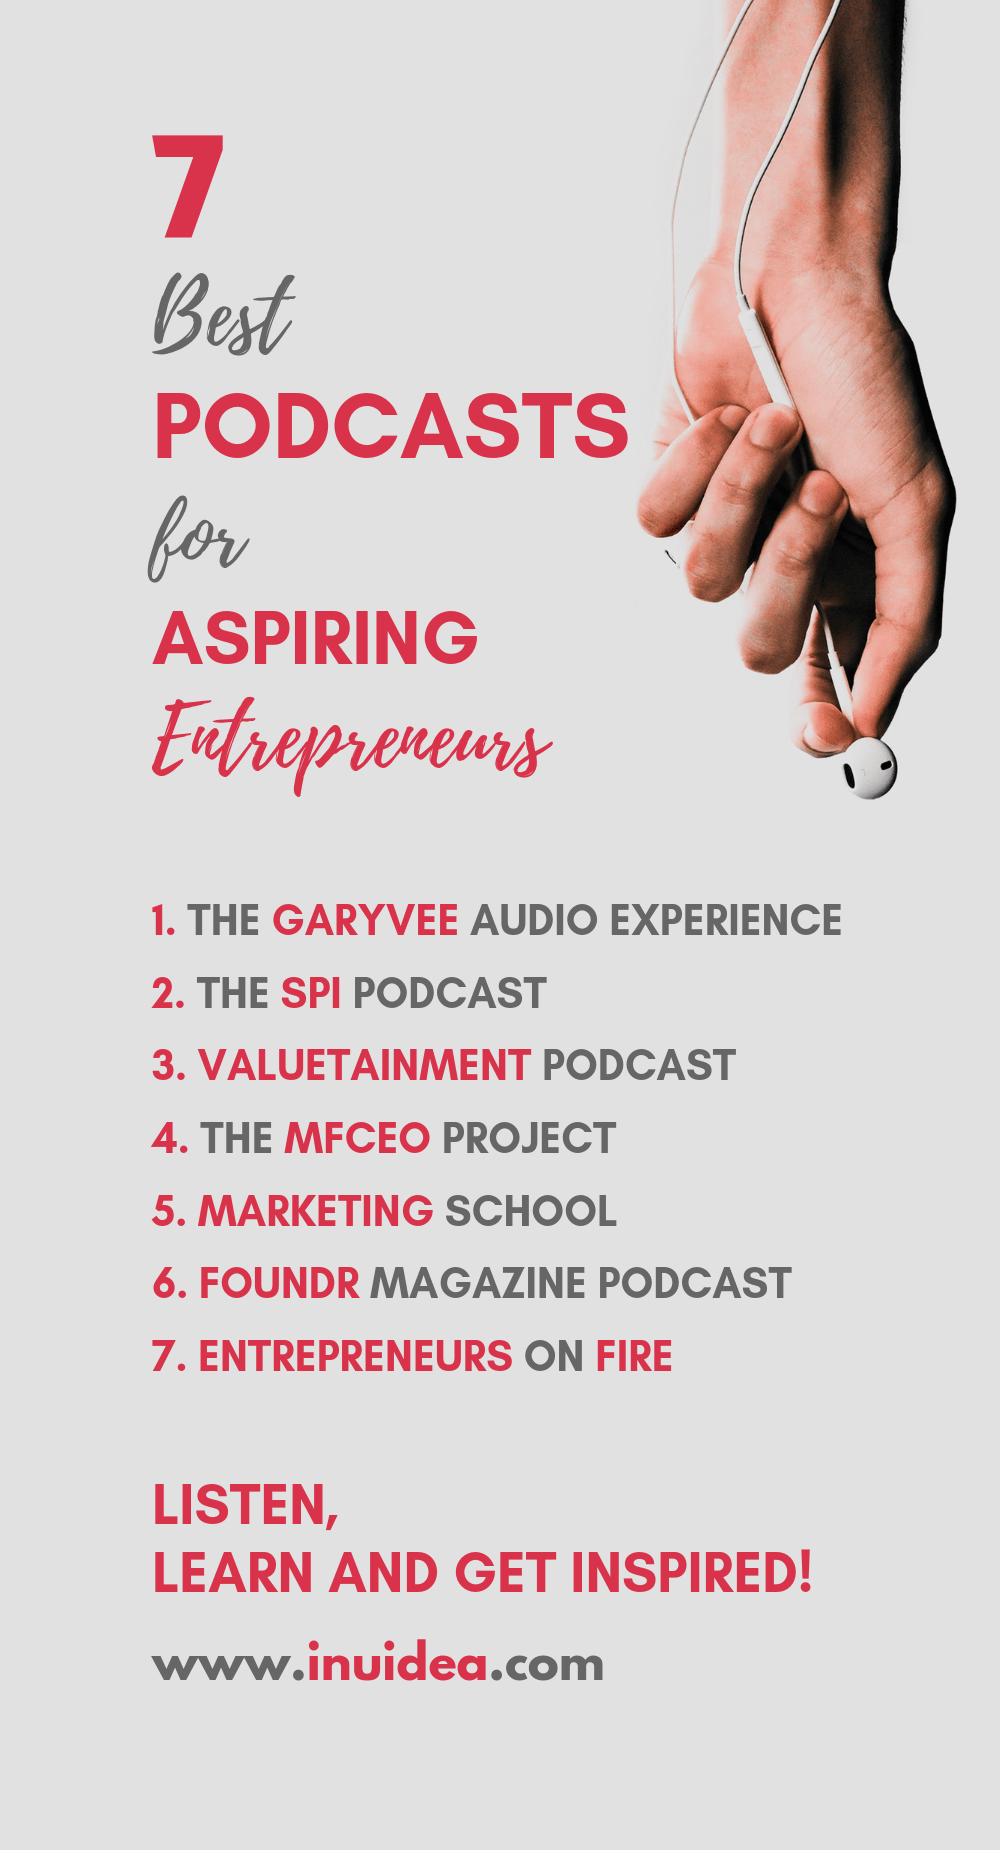 7 Best Podcasts for Aspiring Entrepreneurs - Learn and Get Inspired!